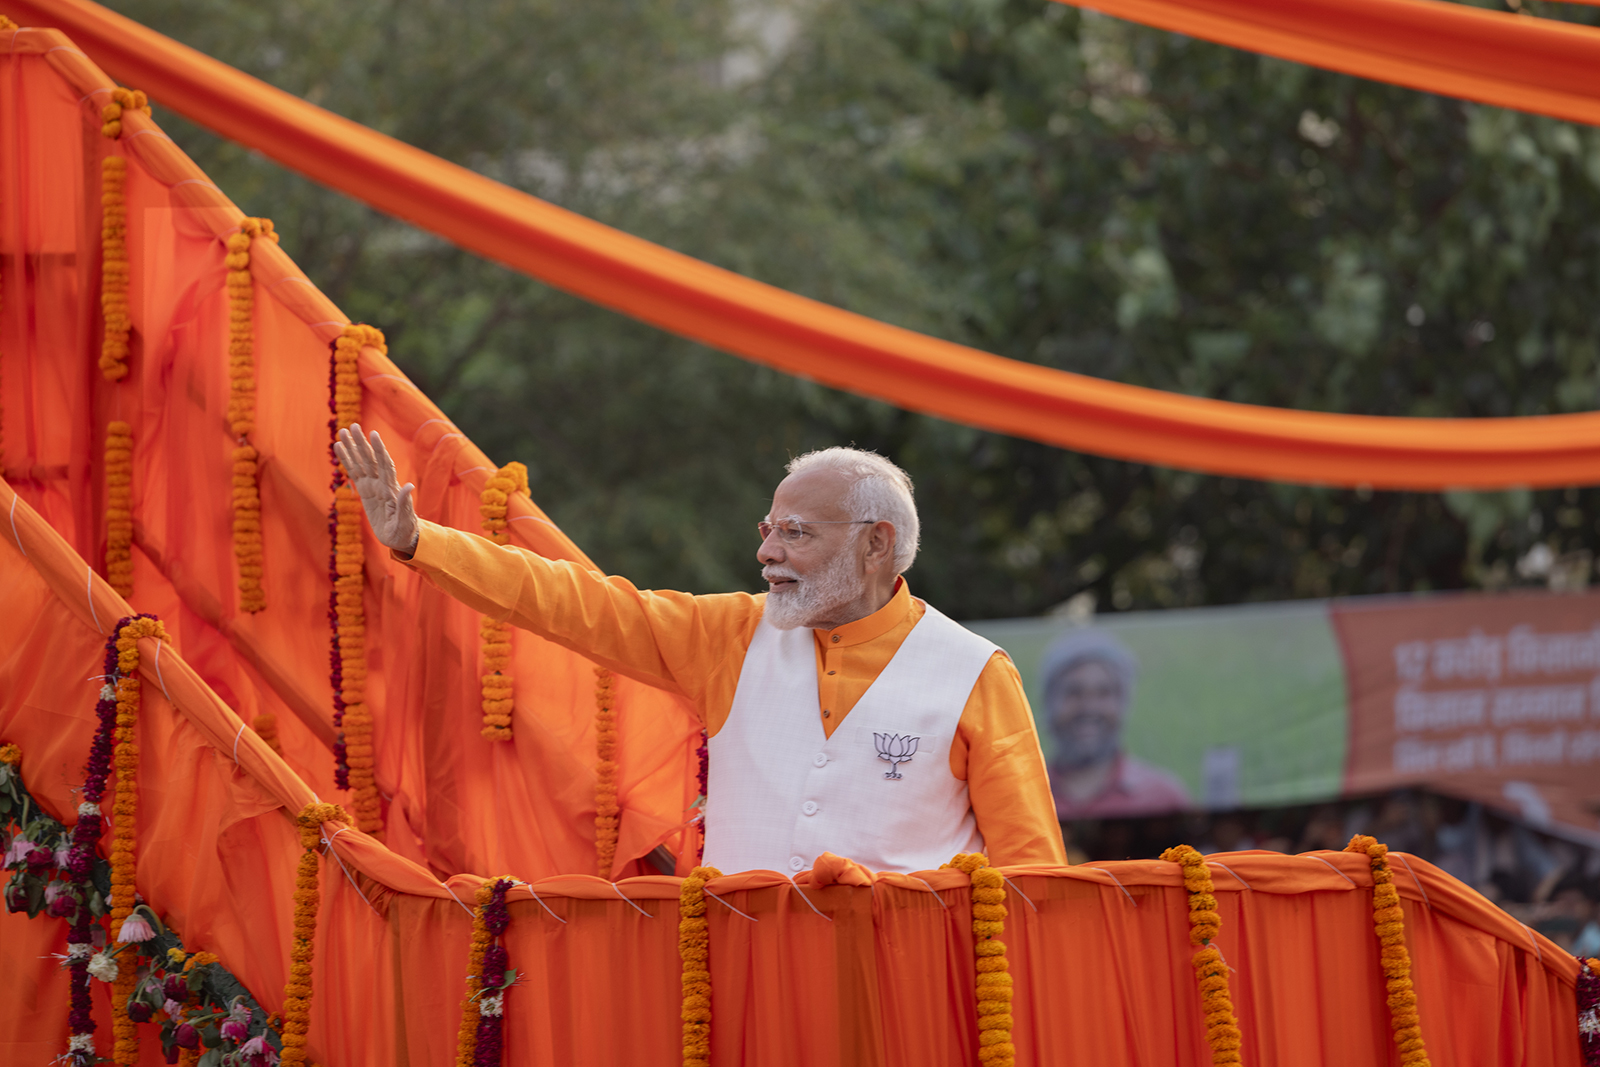 India's Prime Minister, Narendra Modi, greets his supporters during a roadshow on May 13, in Varanasi.